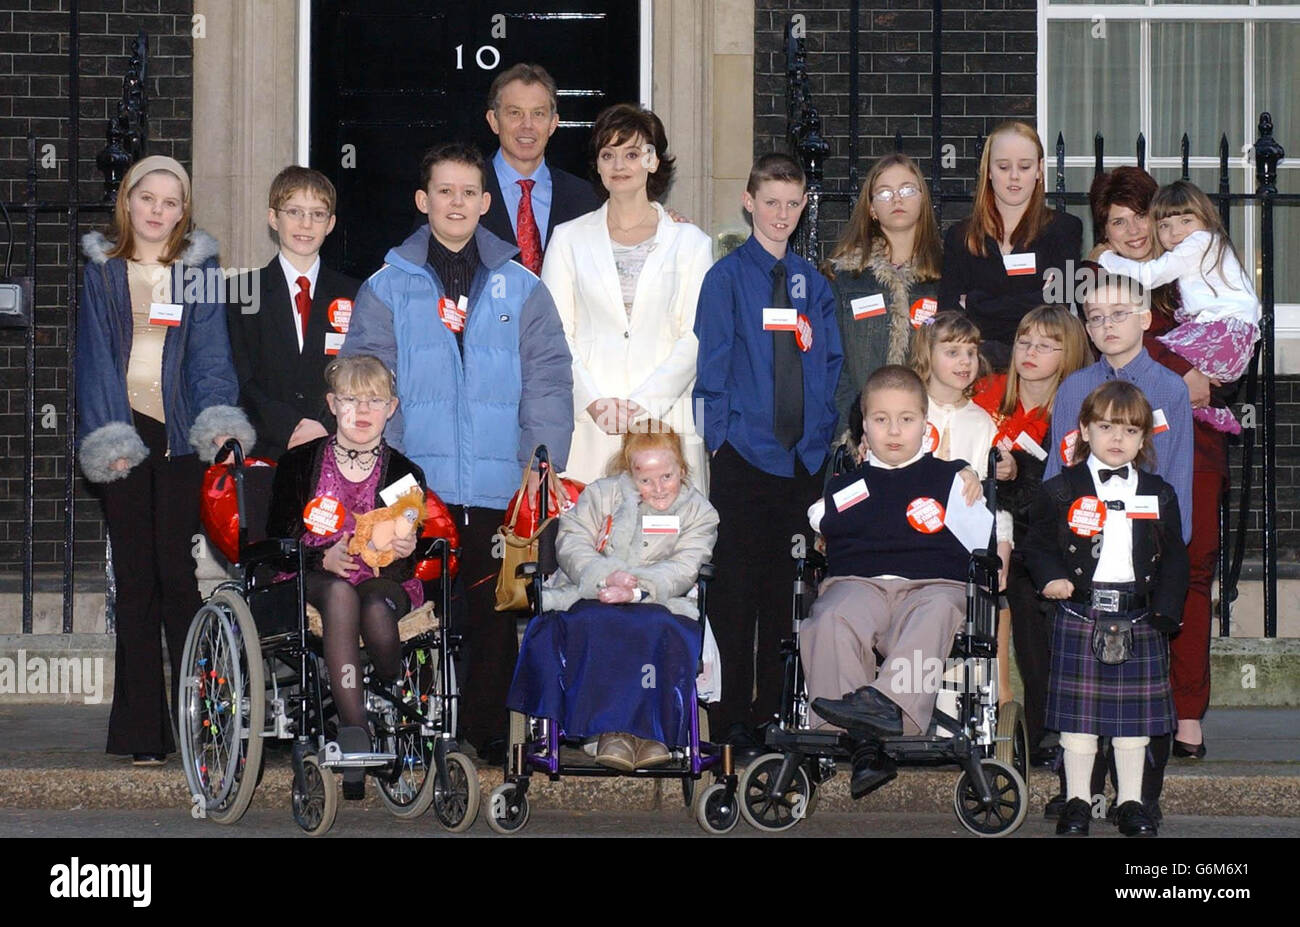 The Prime Minister Tony Blair and his wife Cherie with the Woman's Own Children of Courage 2003 outside 10 Downing Street, London. In all rows the children are listed from left to right. Front row seated; Laura Brewin from Leicester, Melissa Craven from Stockport, Steven O'Shea from Southend -On-Sea, Samuel Bell from Glasgow. Middle row; Kirsty Carlisle from Preston, John Lyons from Sevenoaksin Kent, Nicolas Hyslop from Midlothian, Liam Southall from Dudley, Bethan Ramm from Wrexham (pigtails), Emma Mawdsley from Ripon, Shay Corrie from Tyne and Wear. Rear right row Rachel Mawdsley ( sister Stock Photo